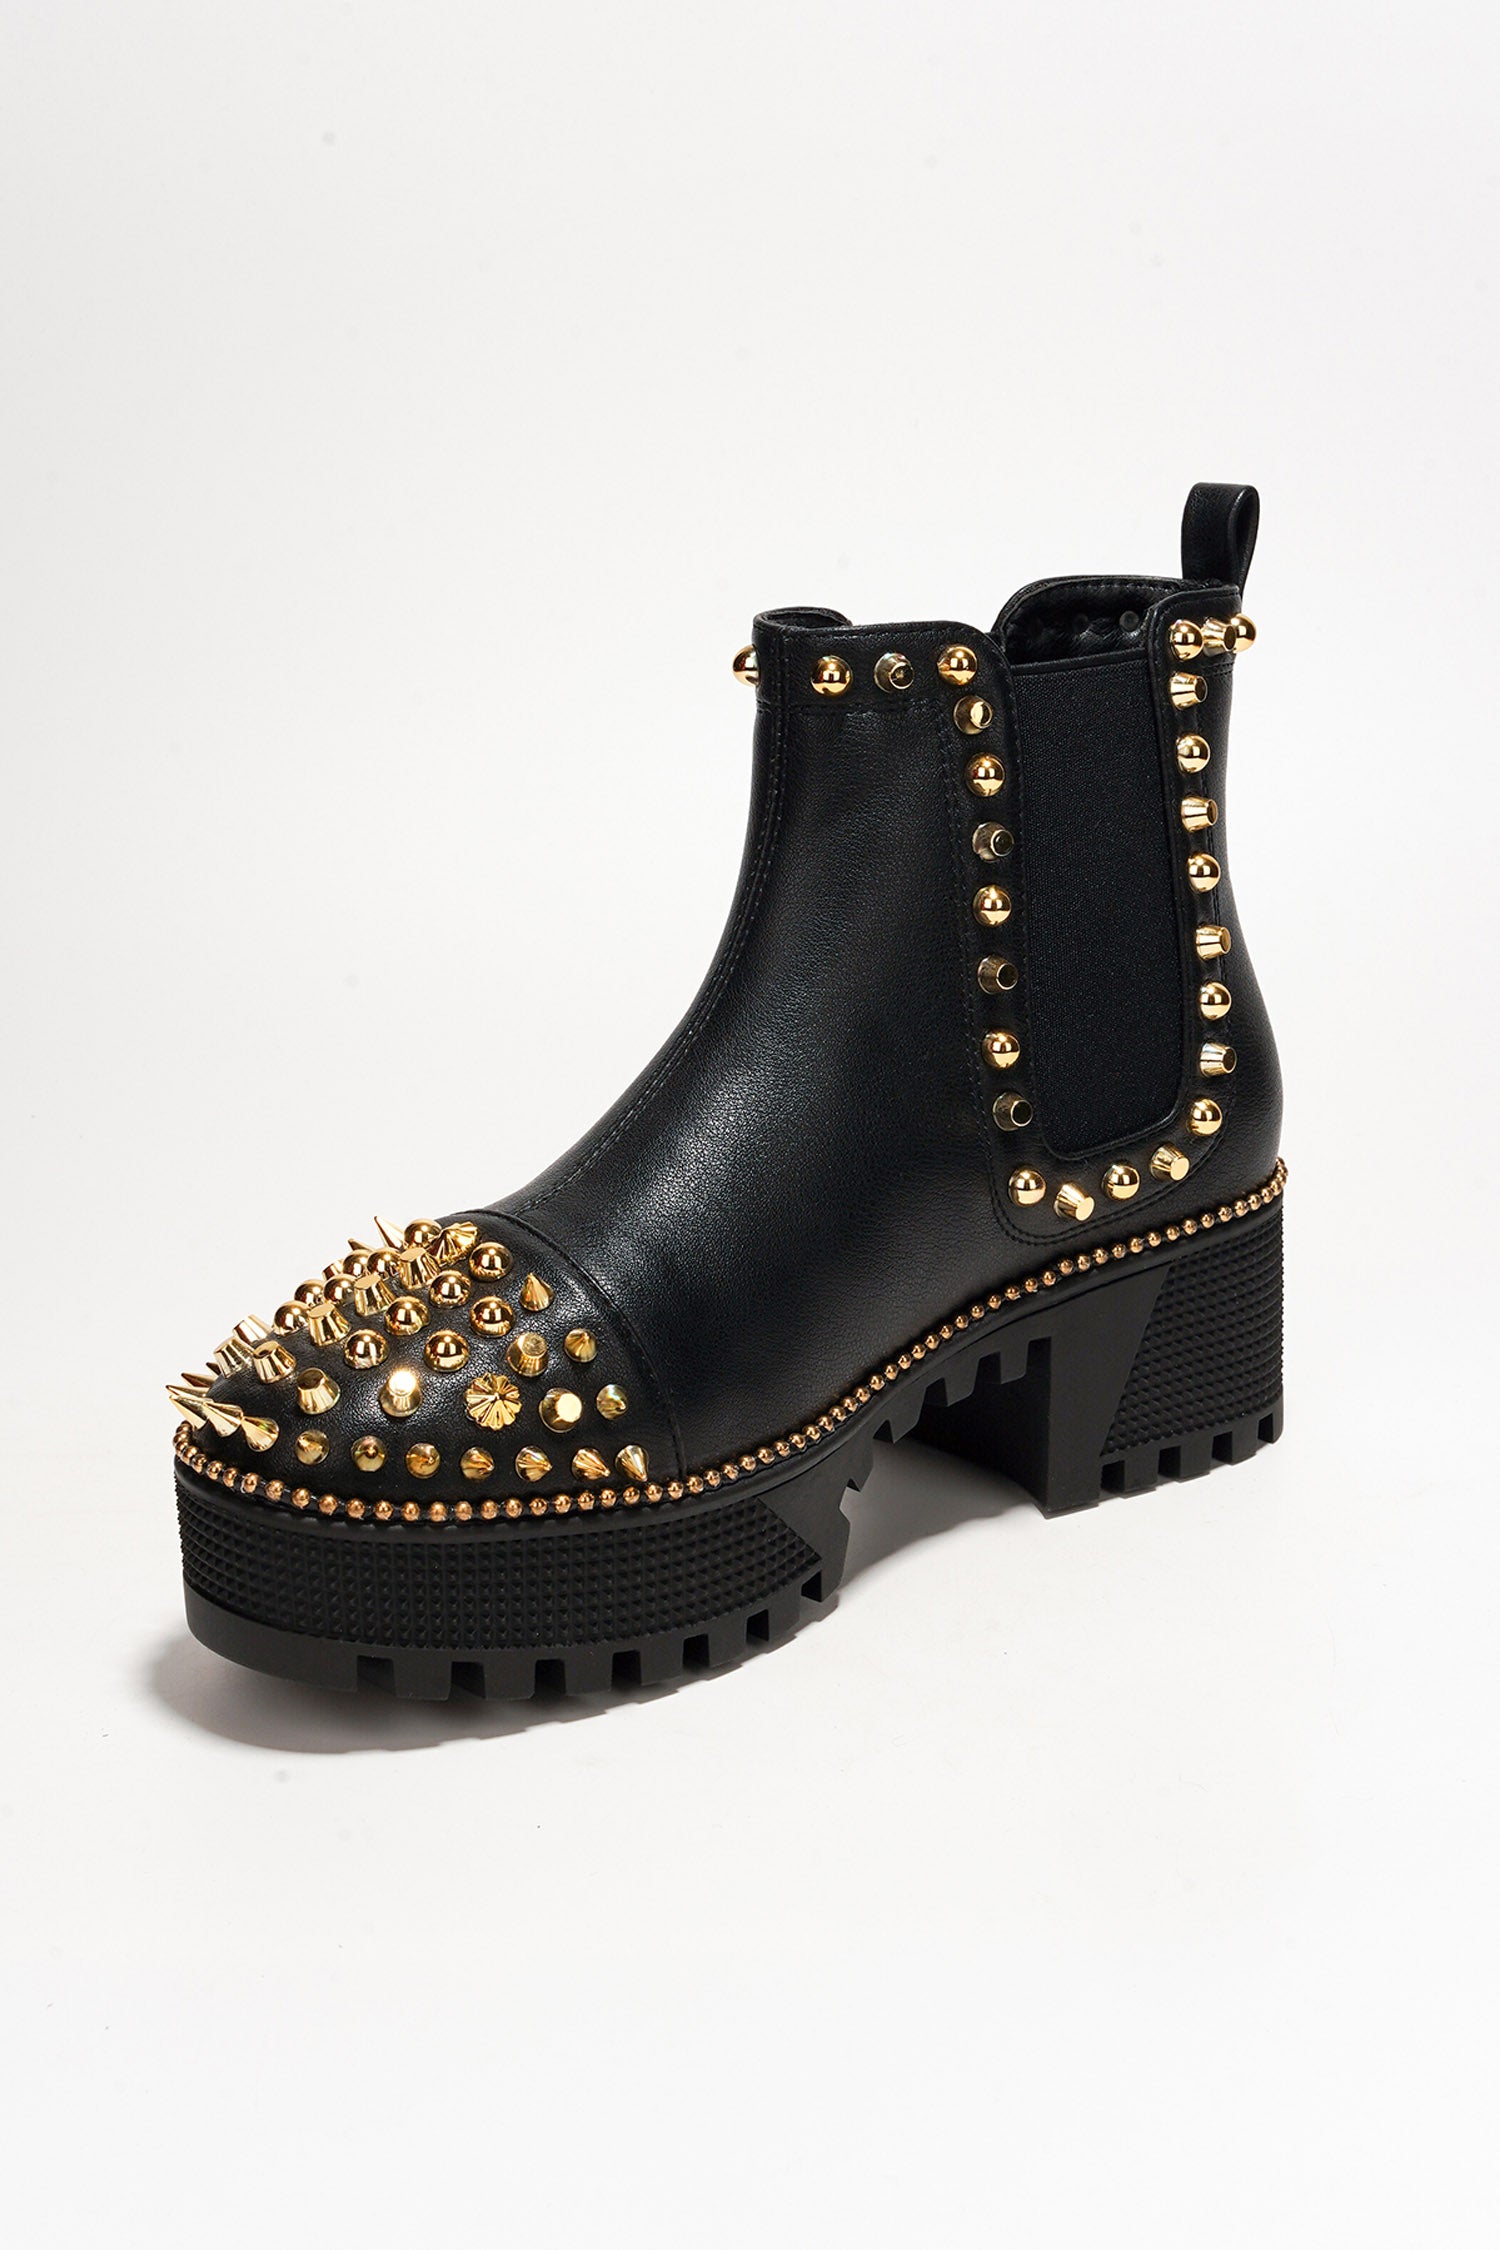 Cape Robbin - SPIKY - BLACK GOLD - BOOTIES